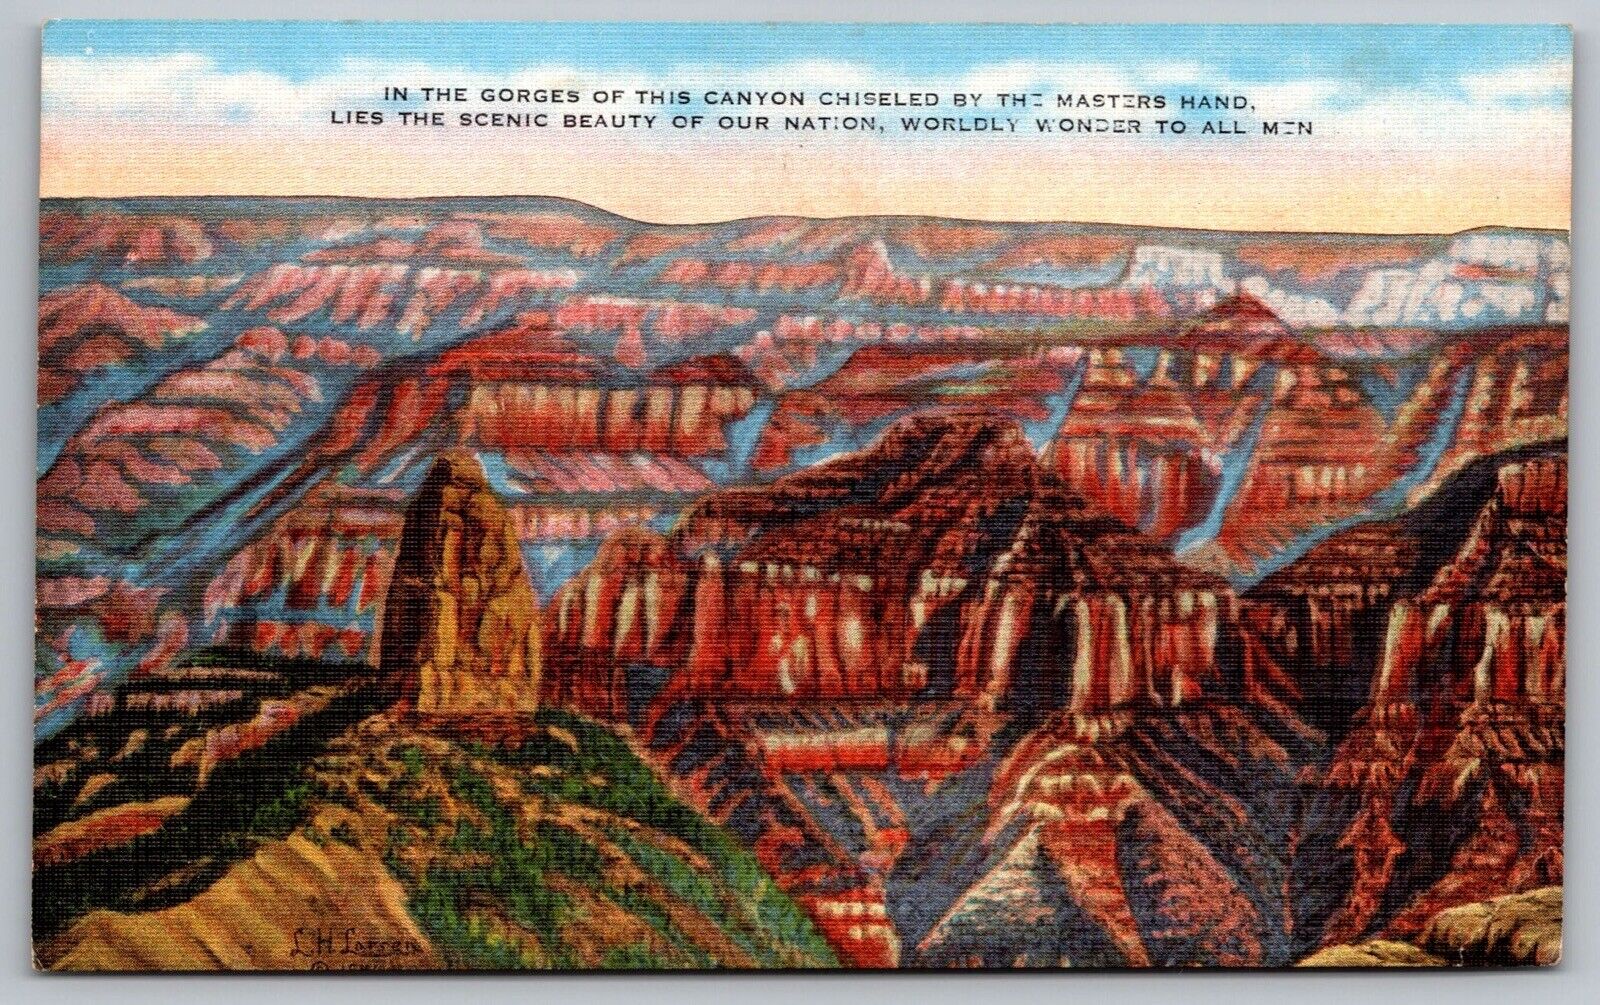 Gorges Canyon Chiseled Masters Hand Birds Eye View Red Sandstone VNG Postcard